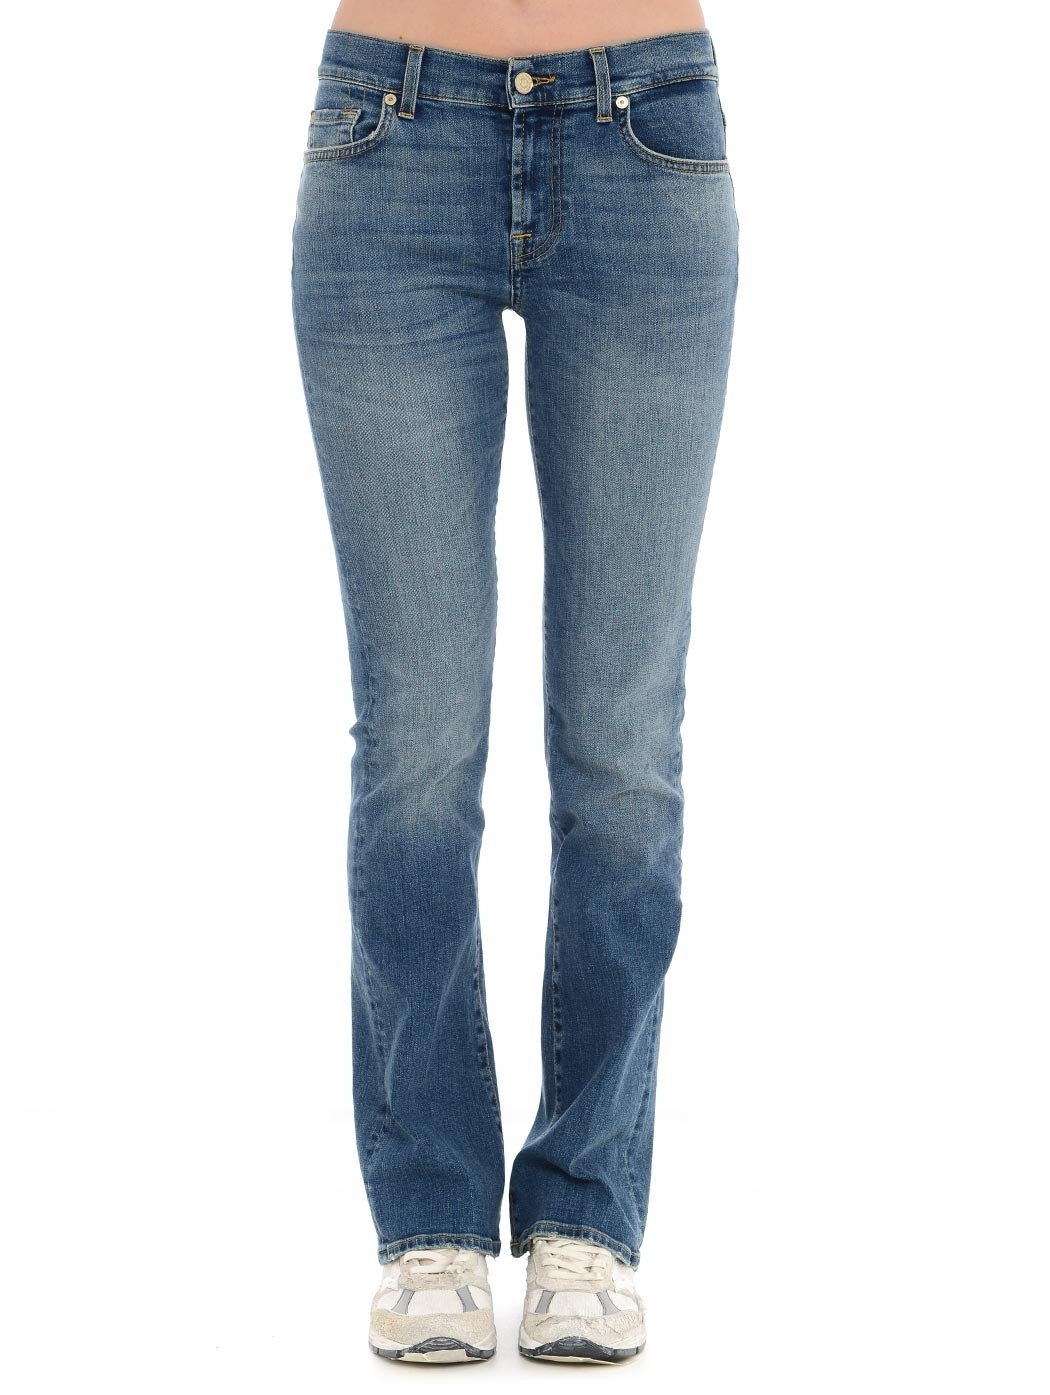    7 FOR ALL MANKIND JSBT44A0